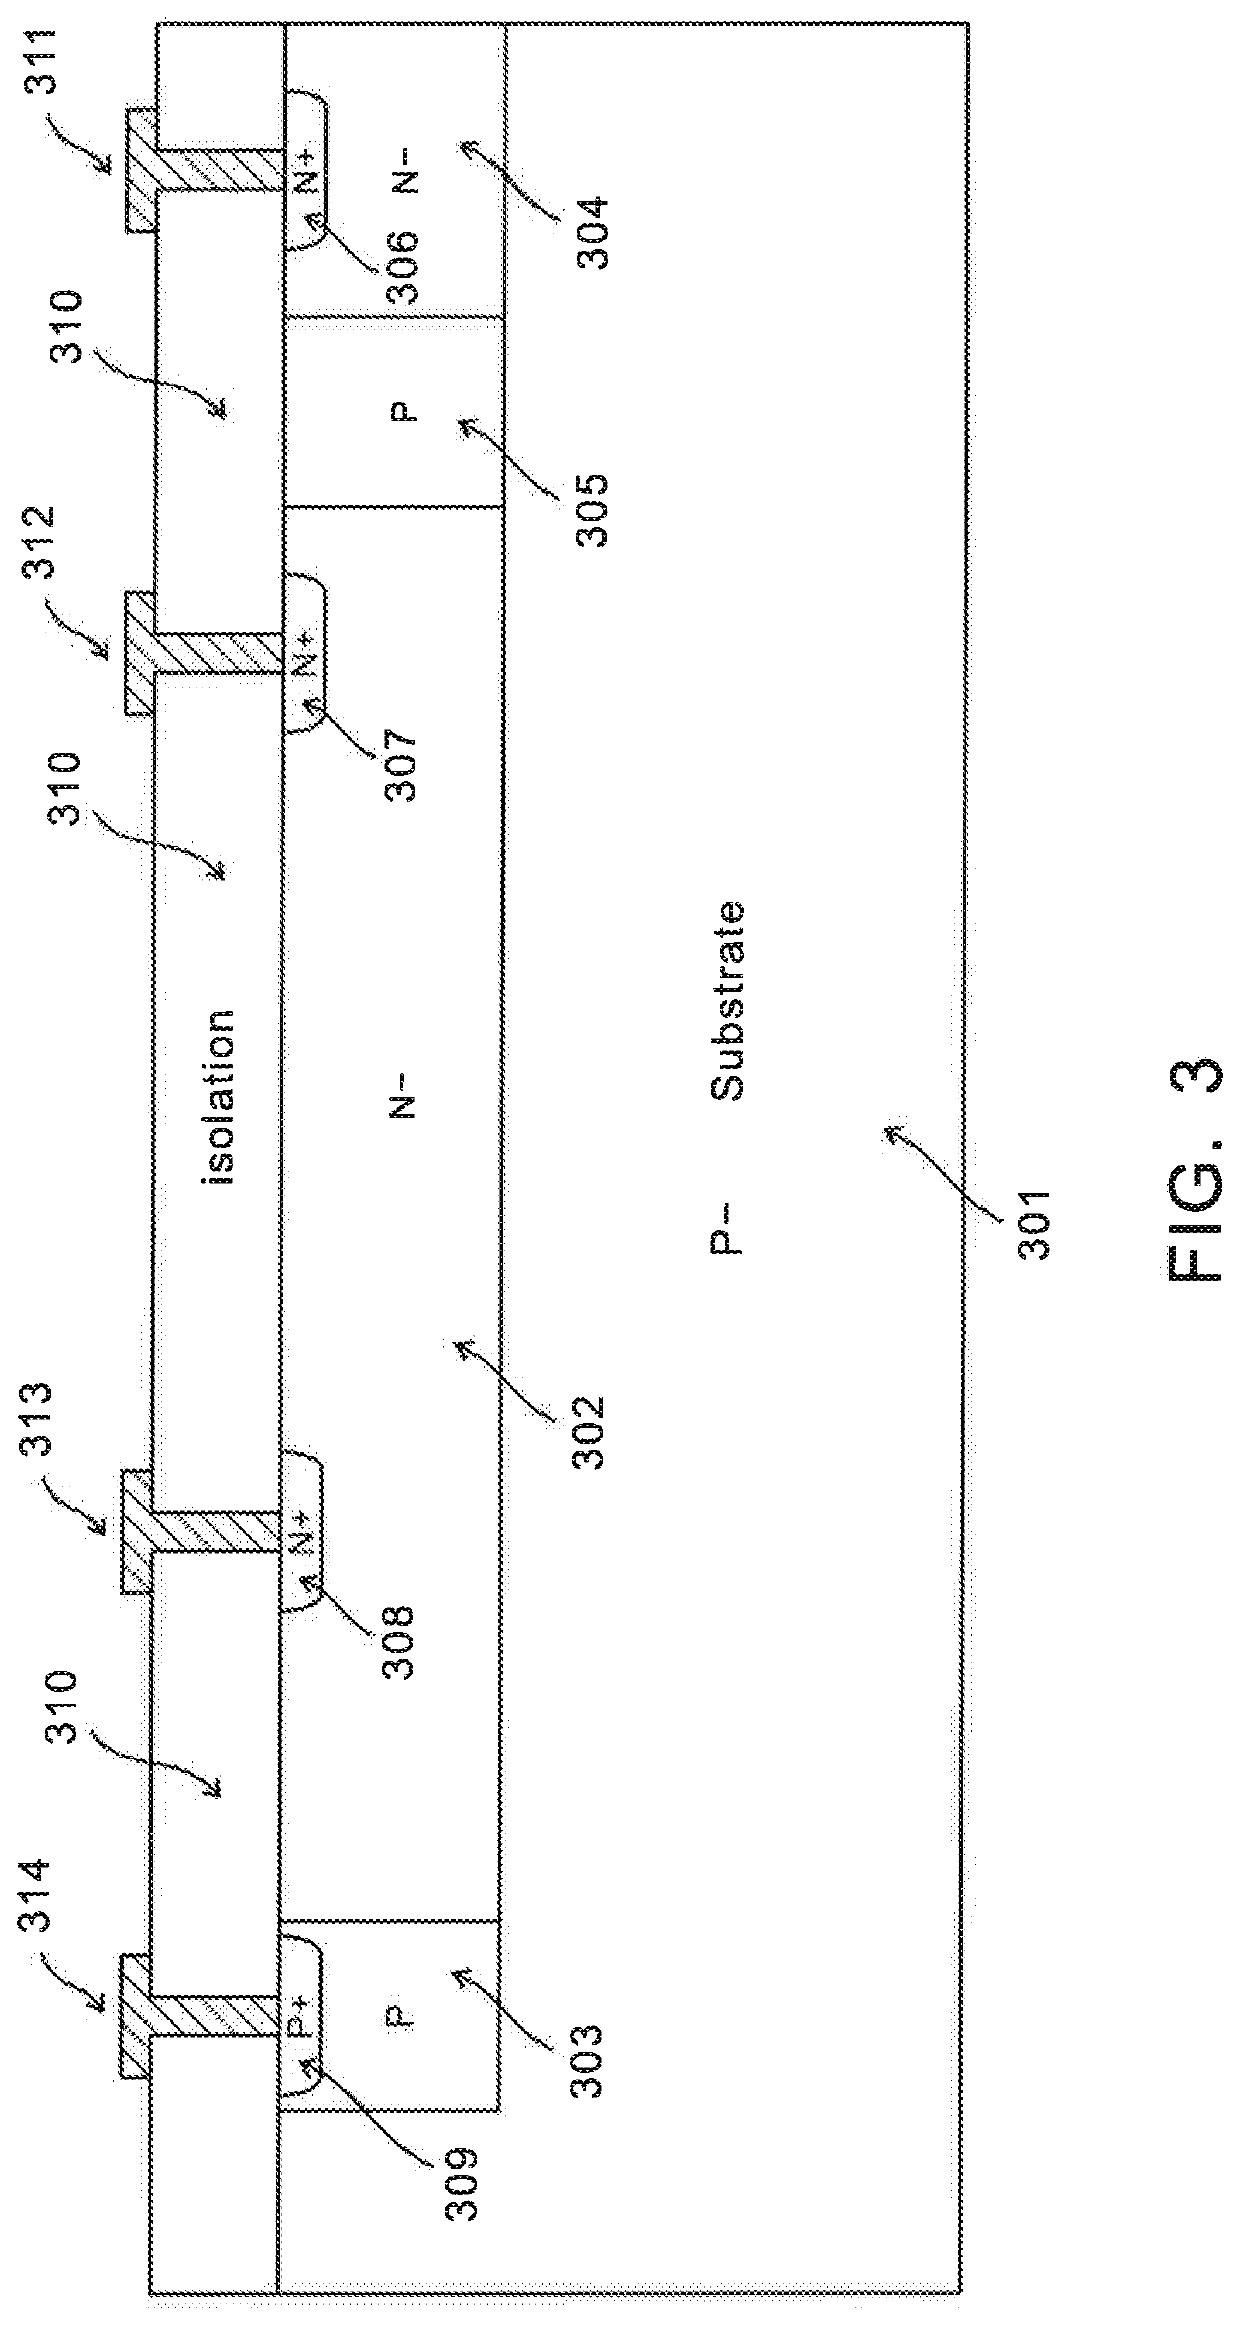 Semiconductor device for high voltage isolation